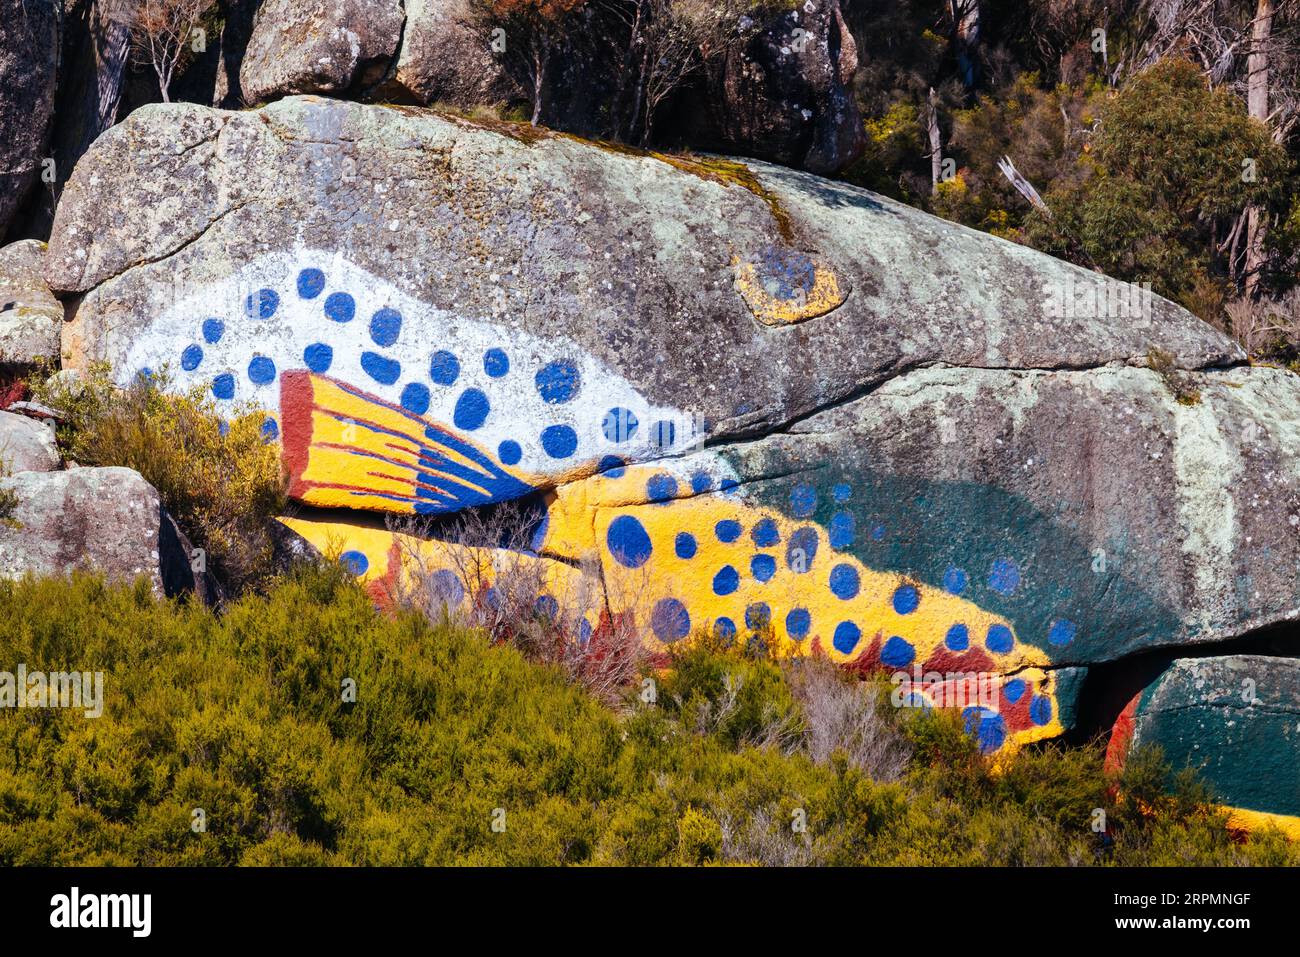 DERBY, AUSTRALIA, SEPTEMBER 23, 2022: Aboriginal fish painting on rock and surrounding landscape in the rural town of Derby on a cold spring morning Stock Photo